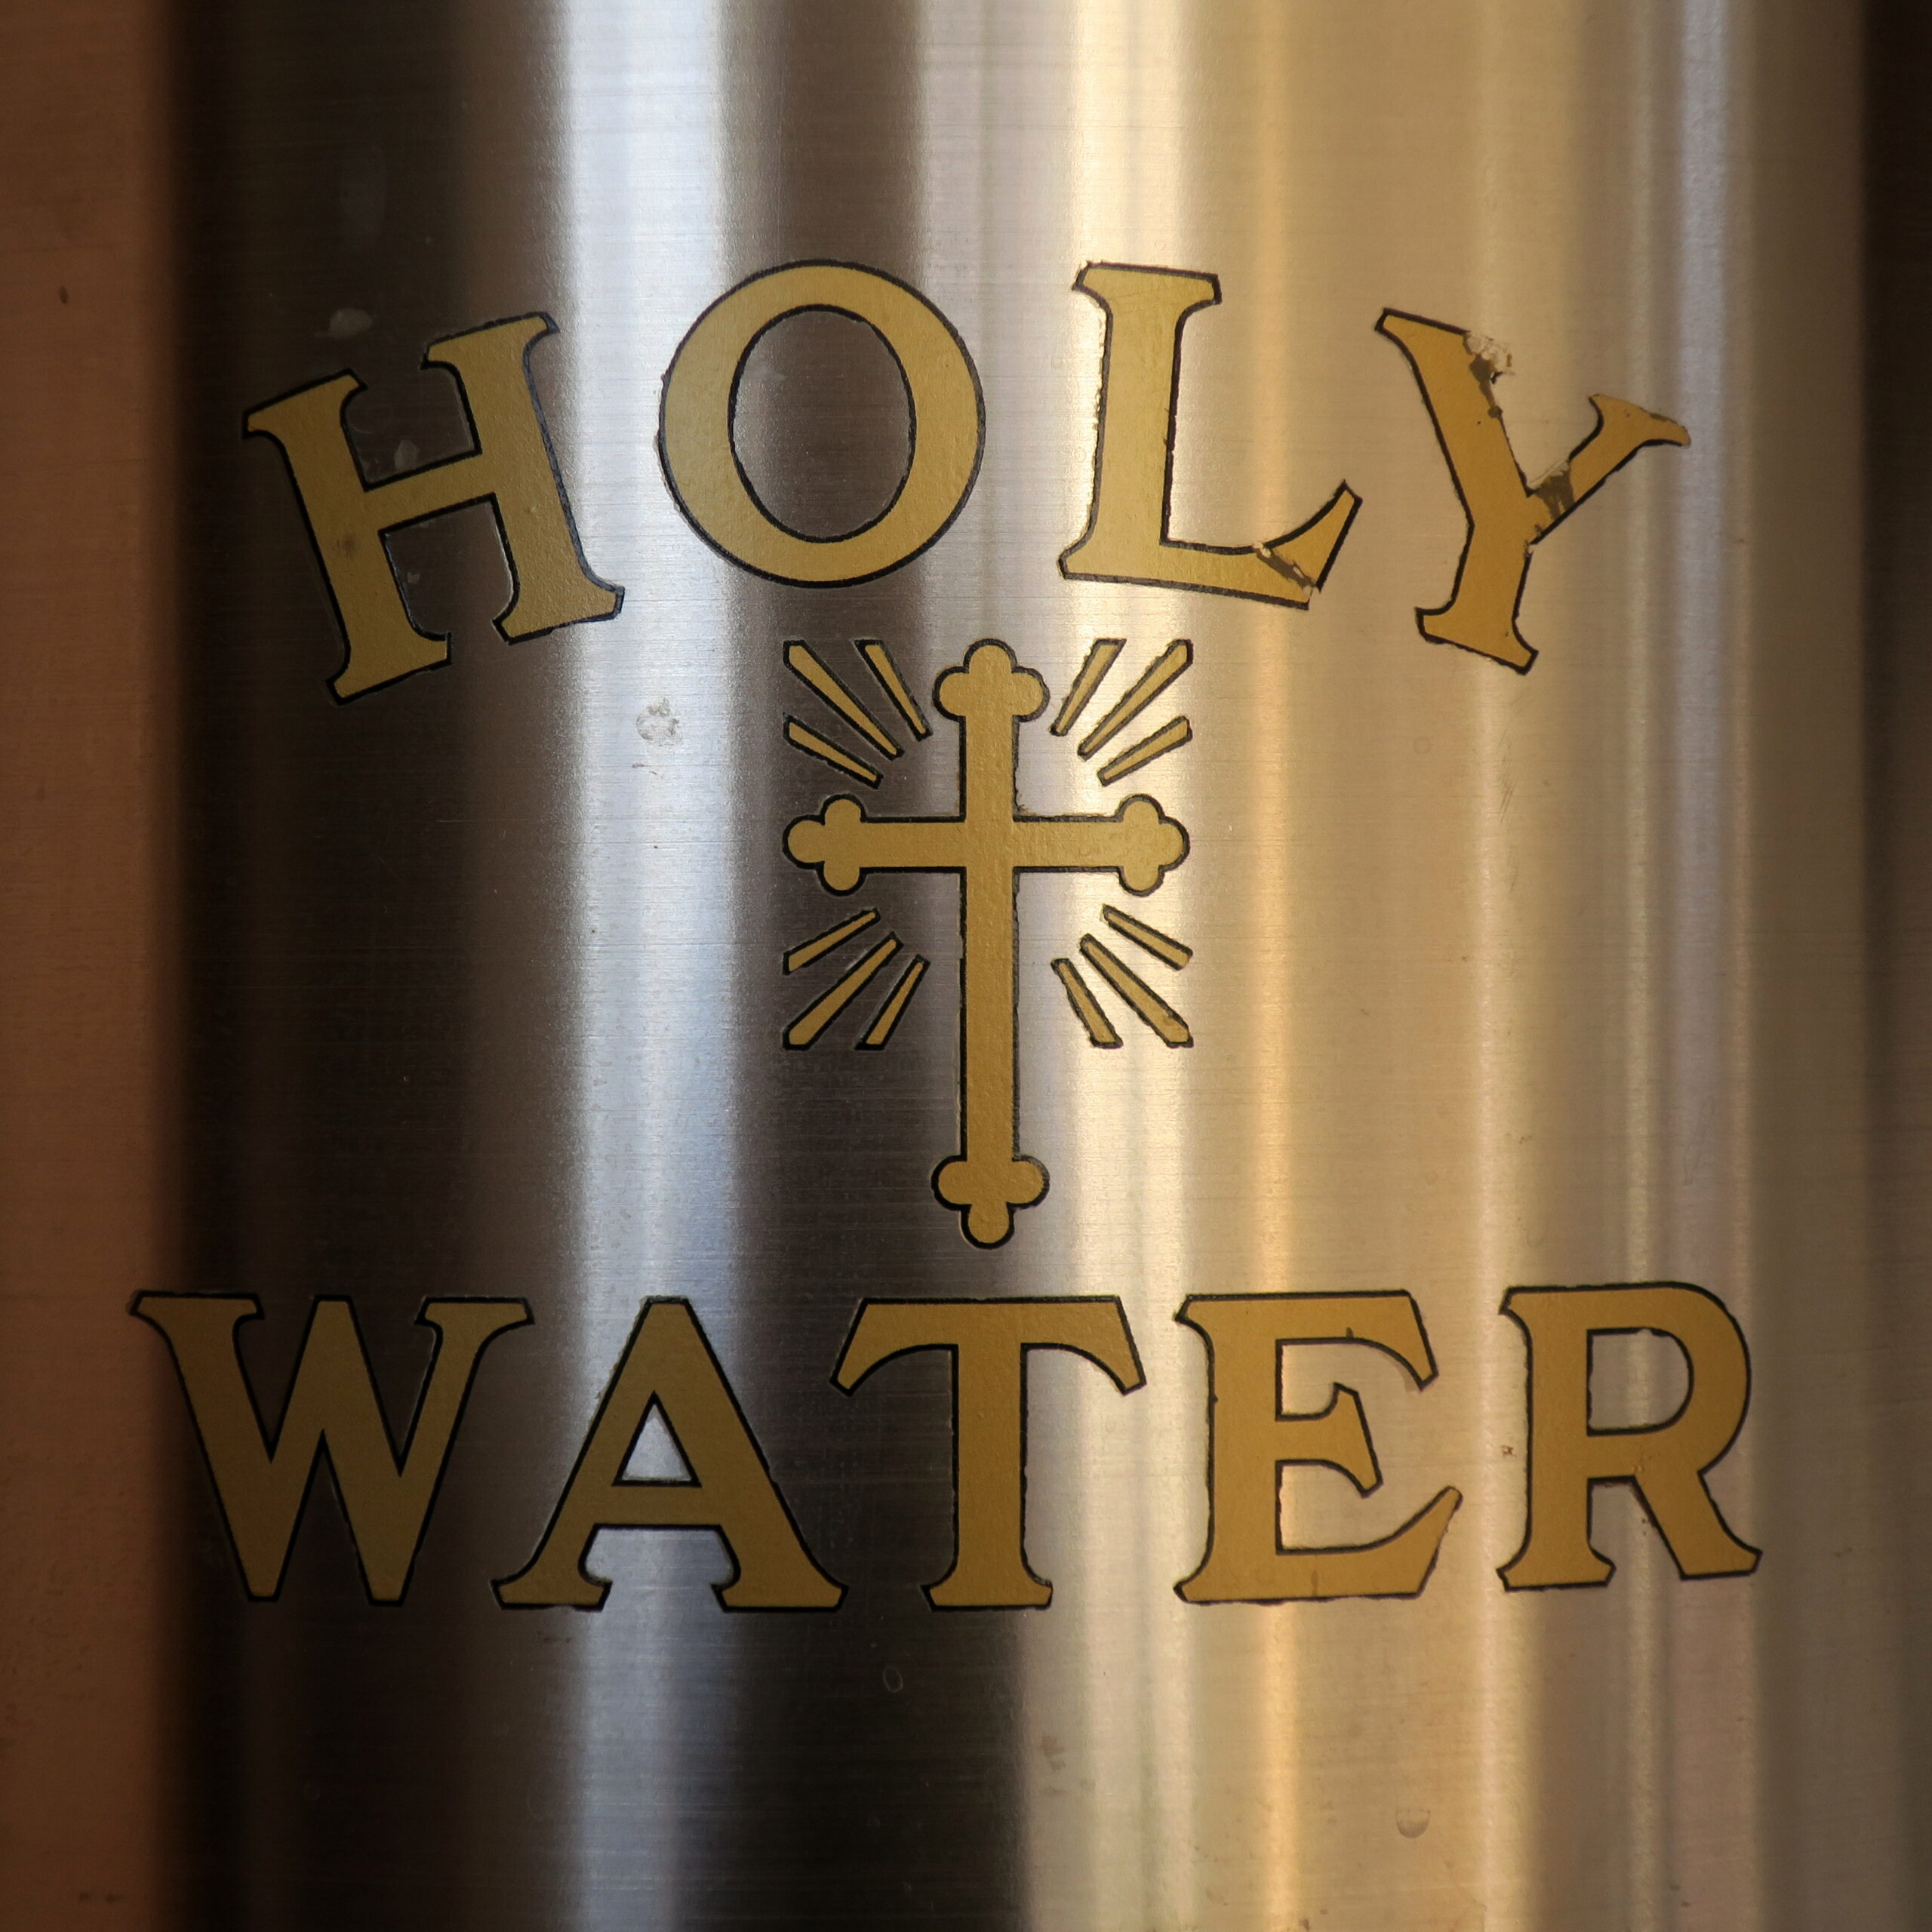 History and usage of holy water